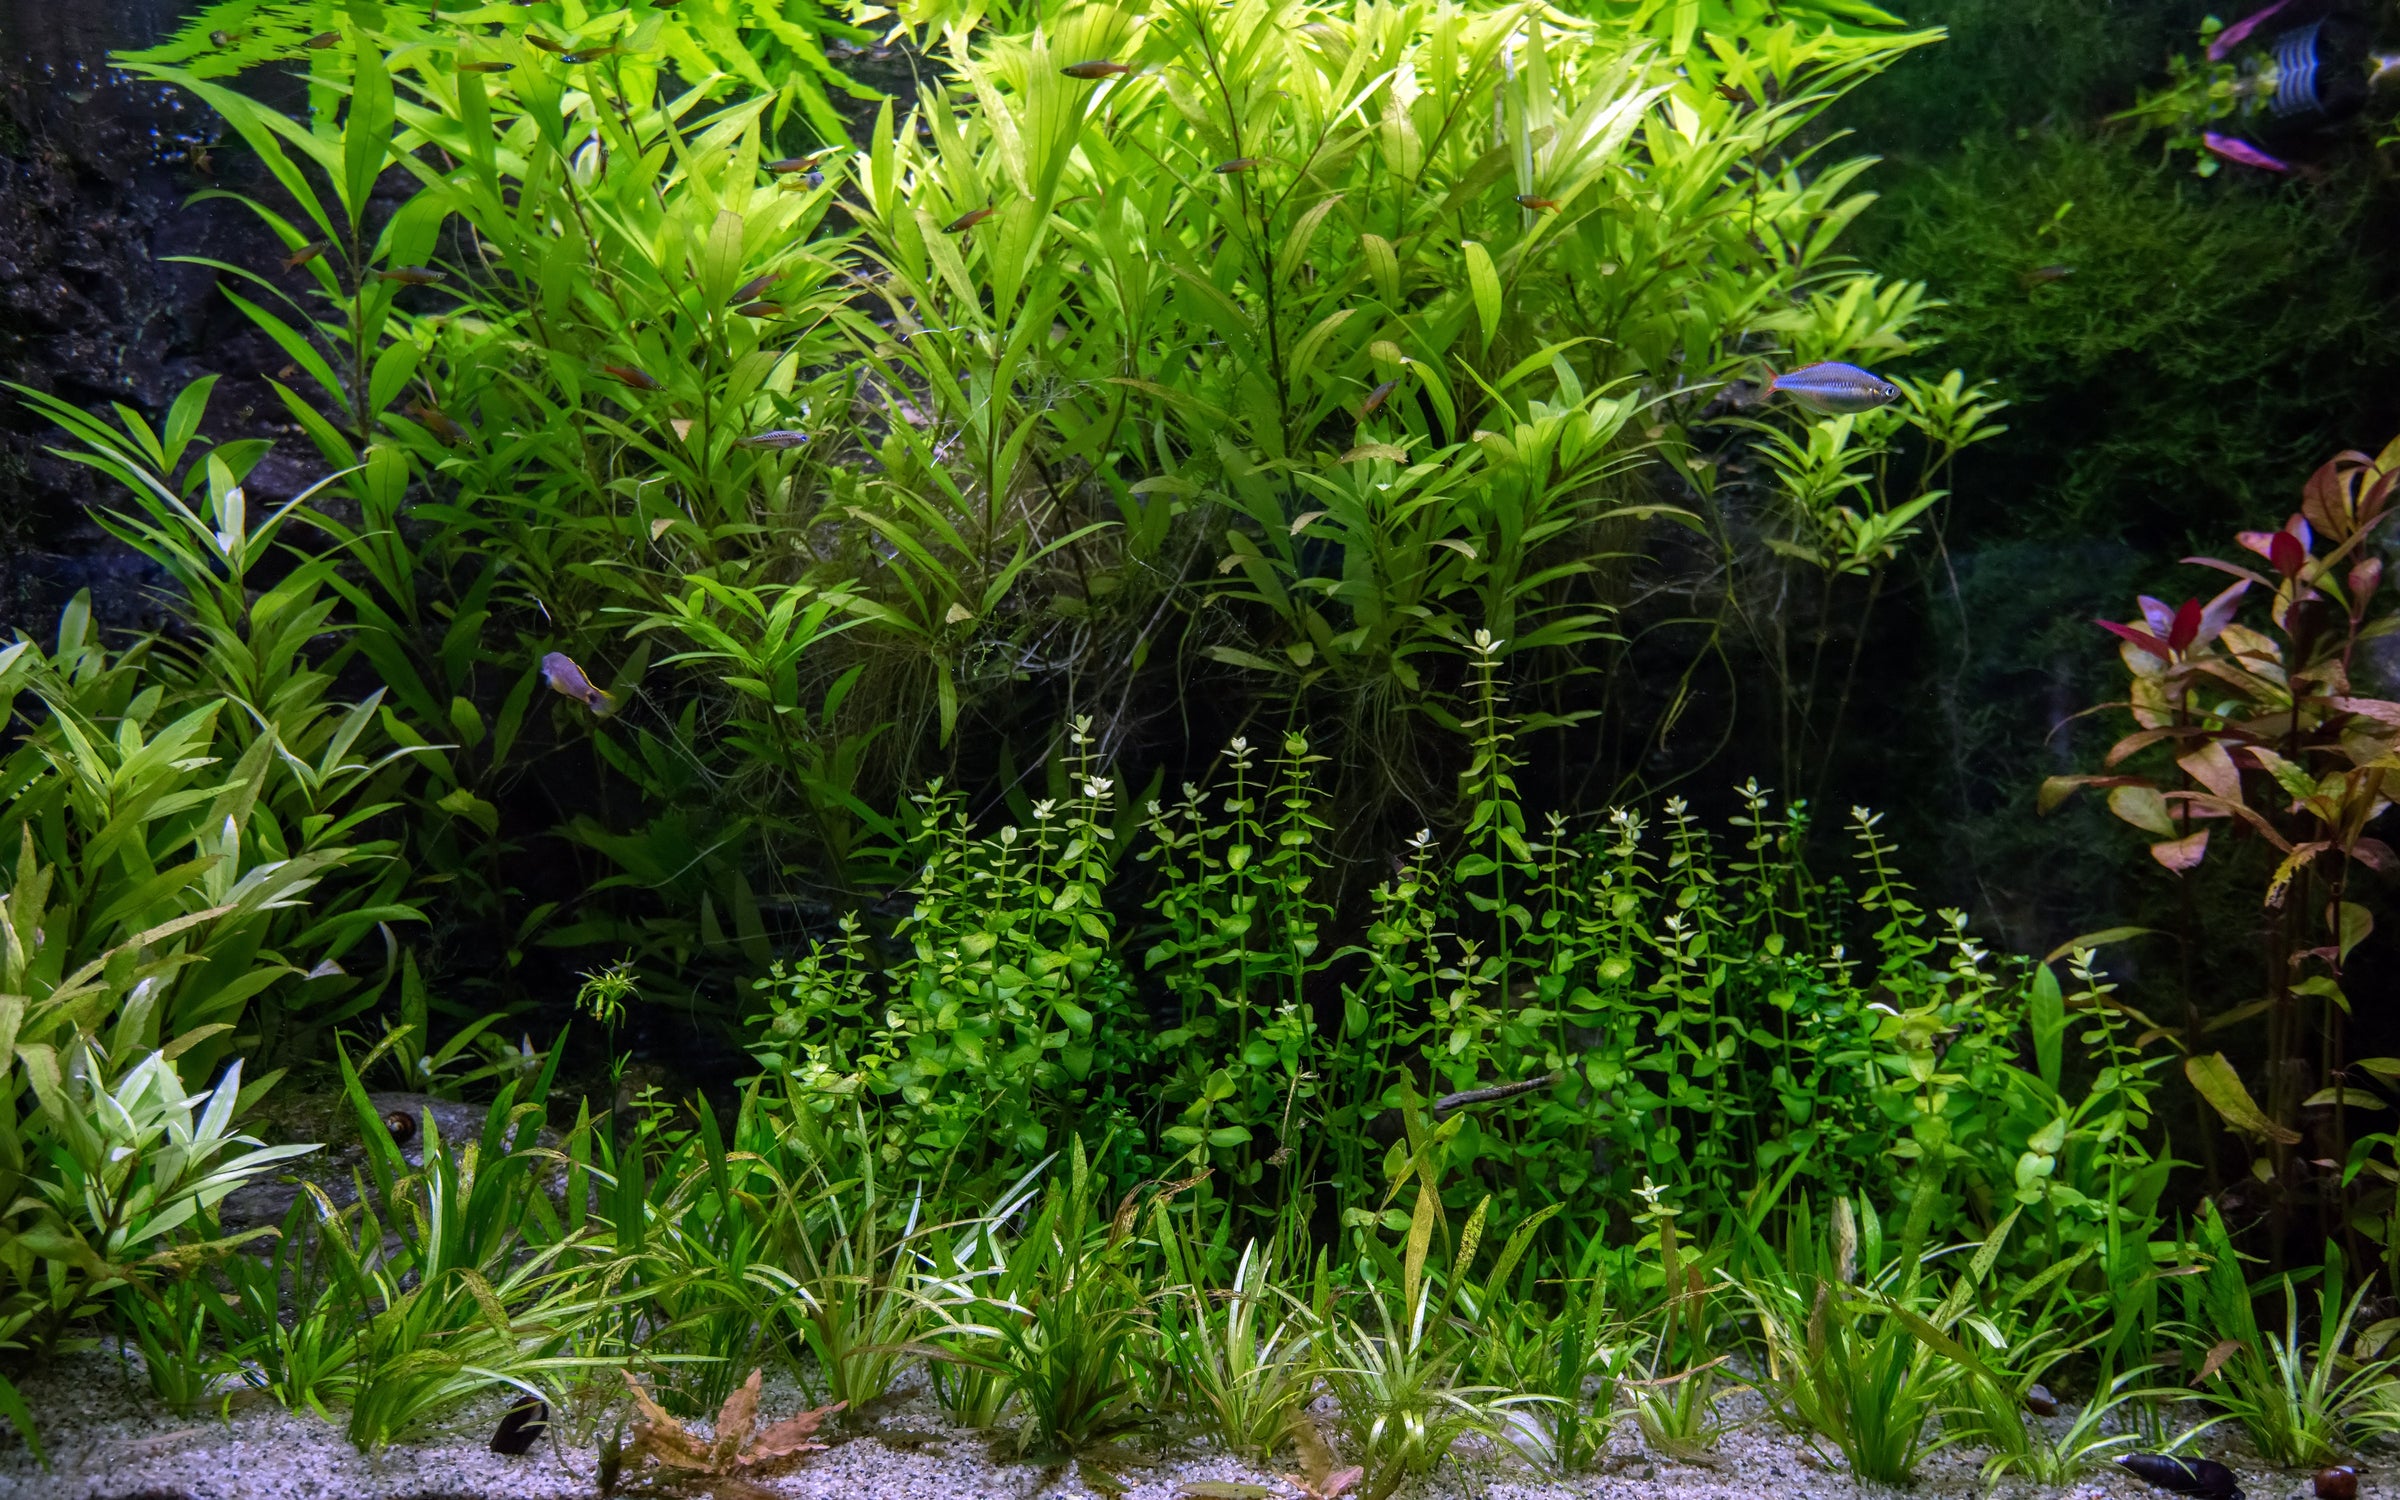 foreground plants in an aquarium are varies with different type of plants such as Christmas Moss, Java Moss, Anubias Nana Petite to Cryptocoryne Lutea.